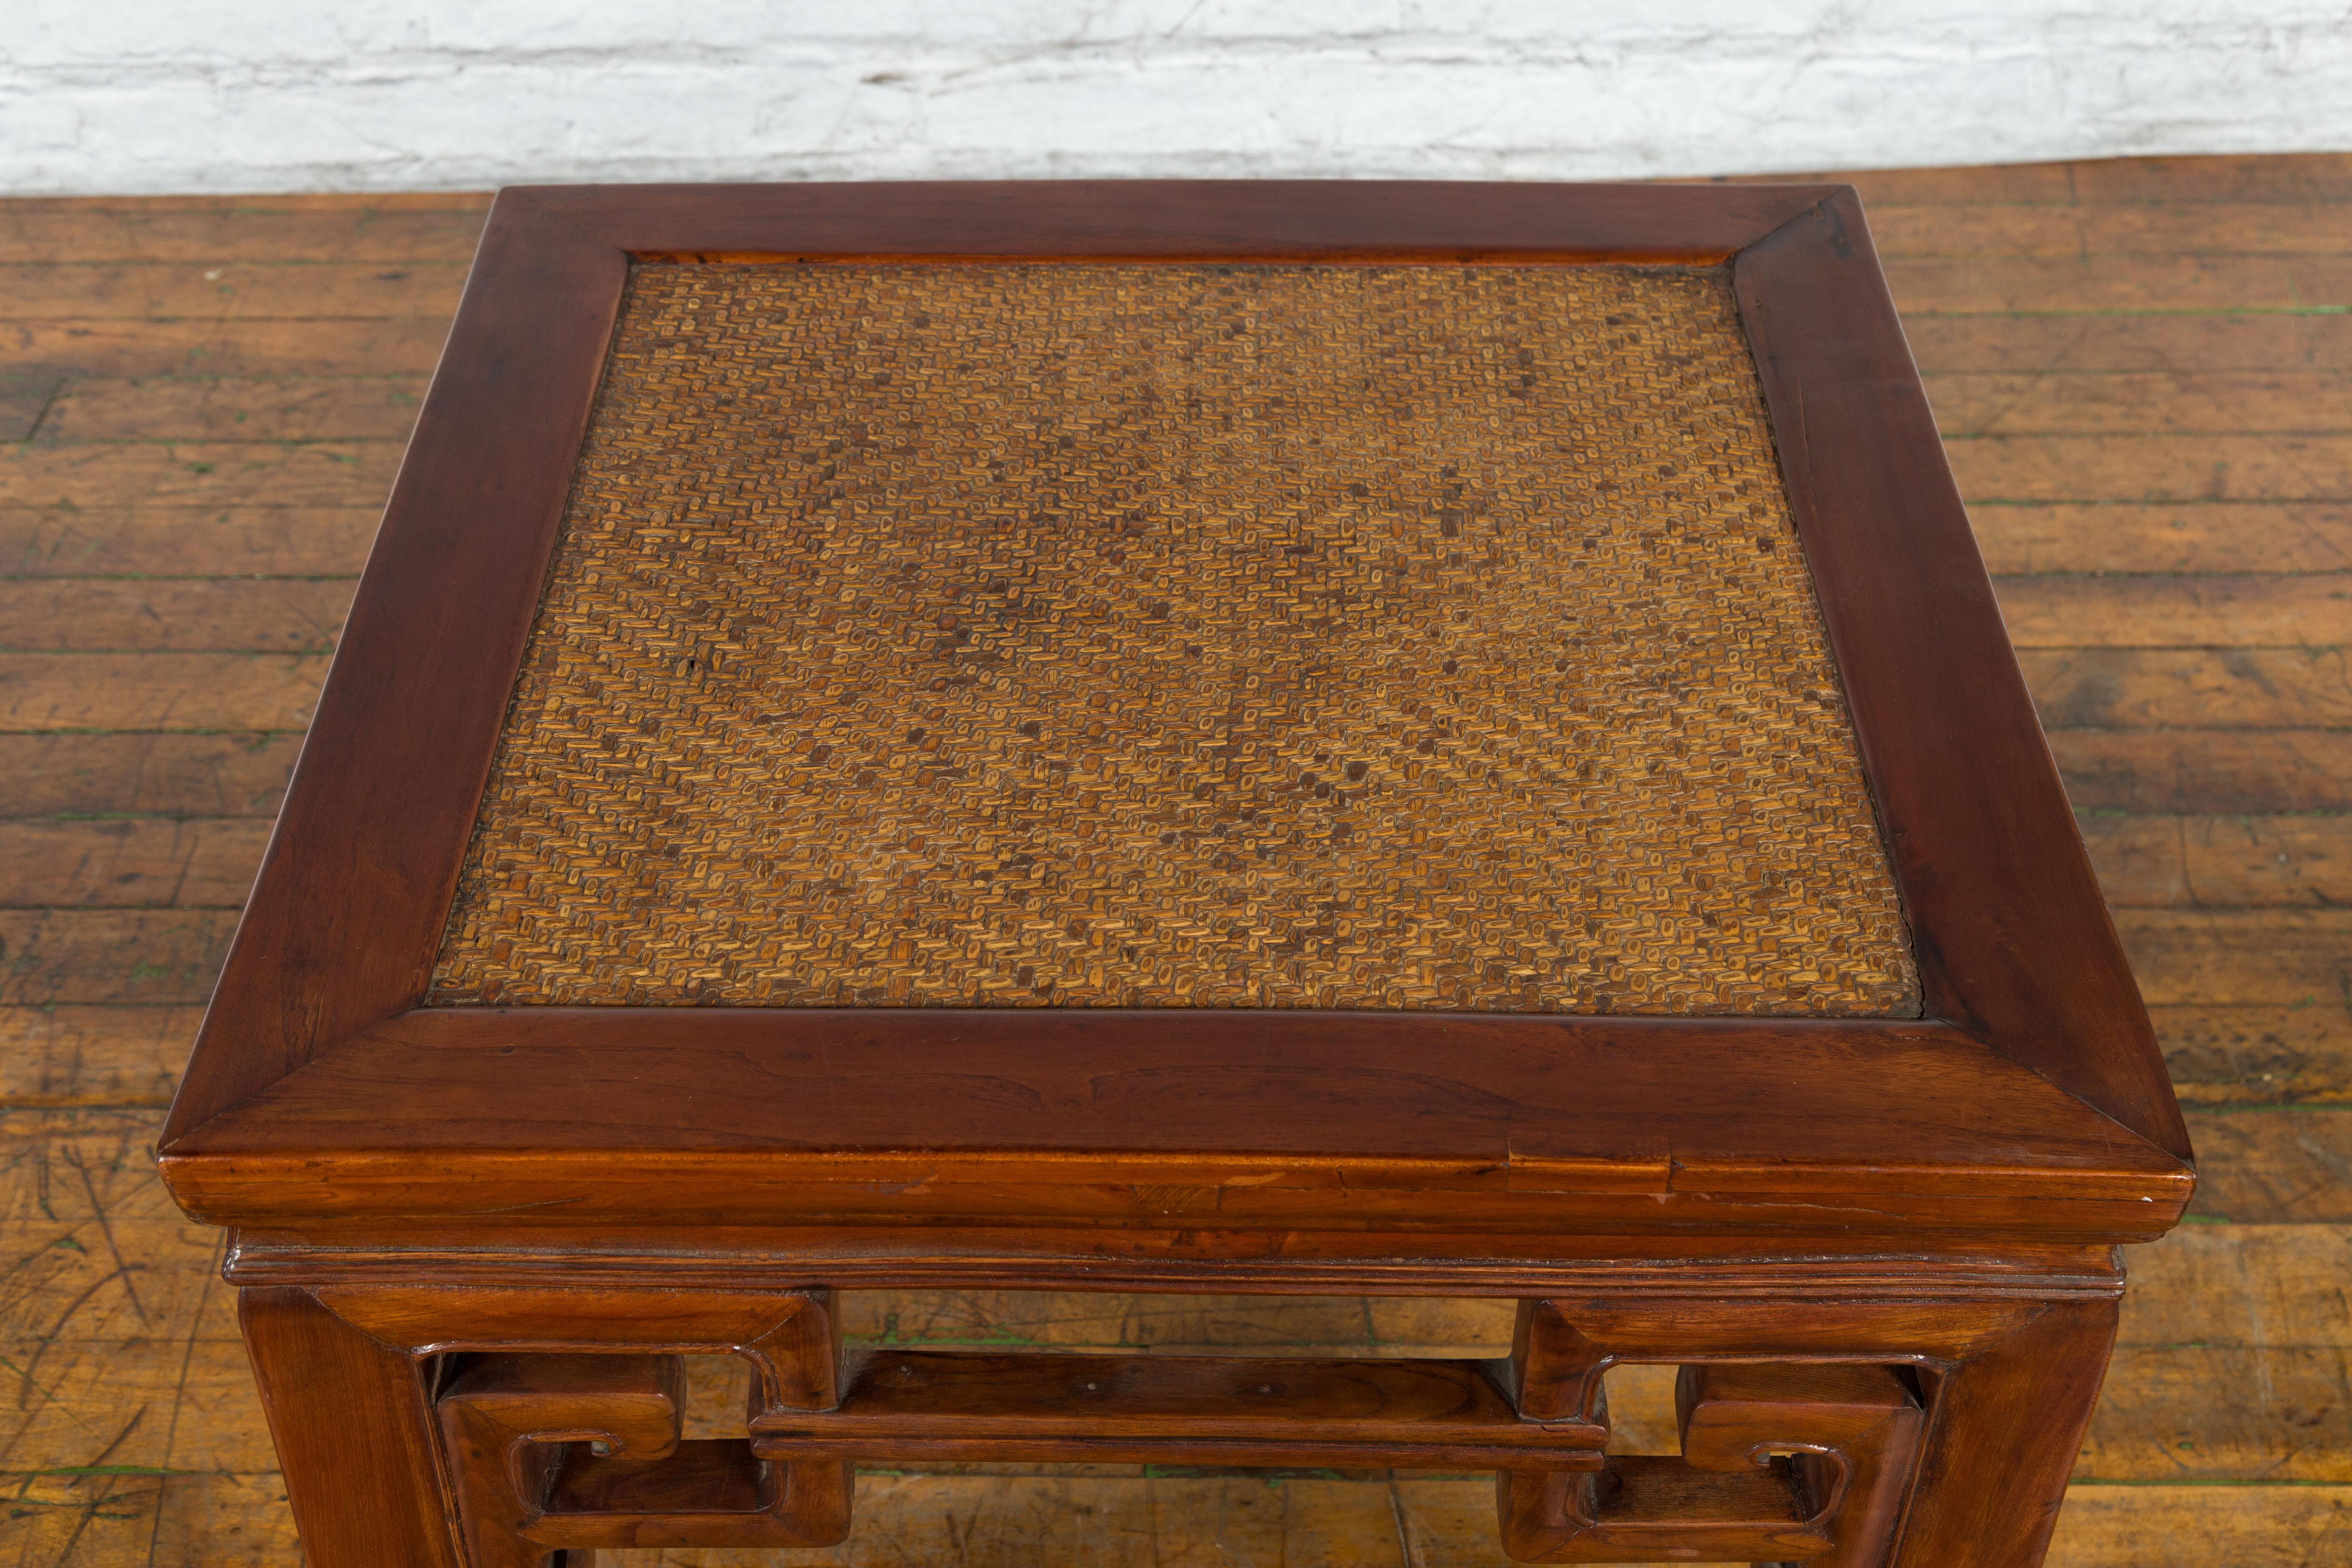 Chinese Qing Dynasty 19th Century Stool or Drinks Table with Woven Rattan Top For Sale 5